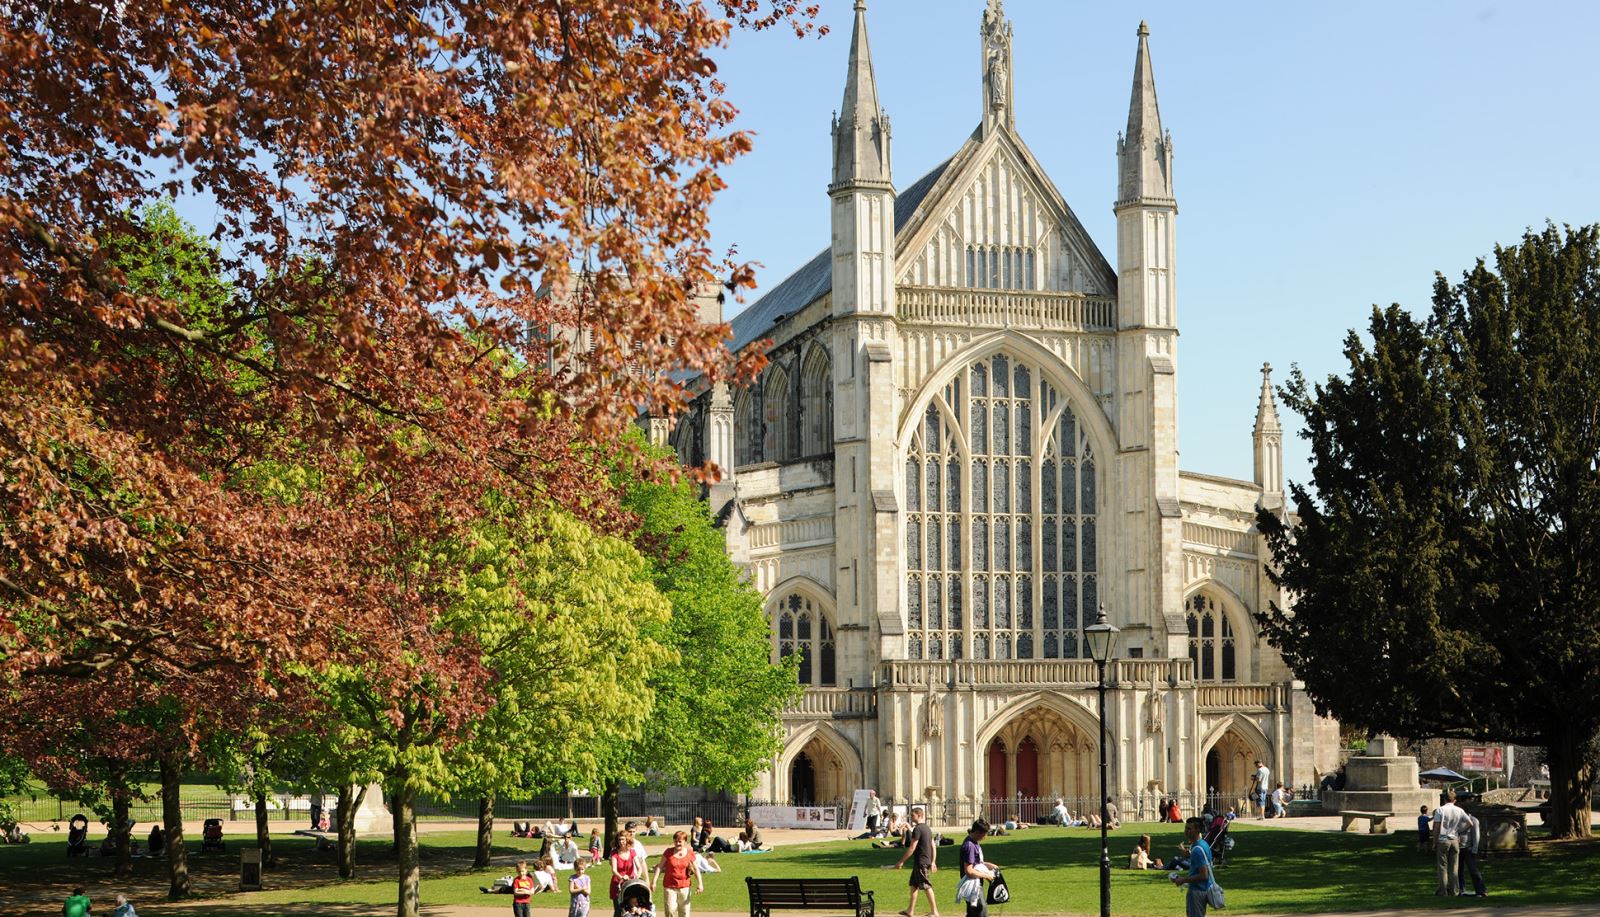 Winchester Cathedral and Outer Close in the city of Winchester